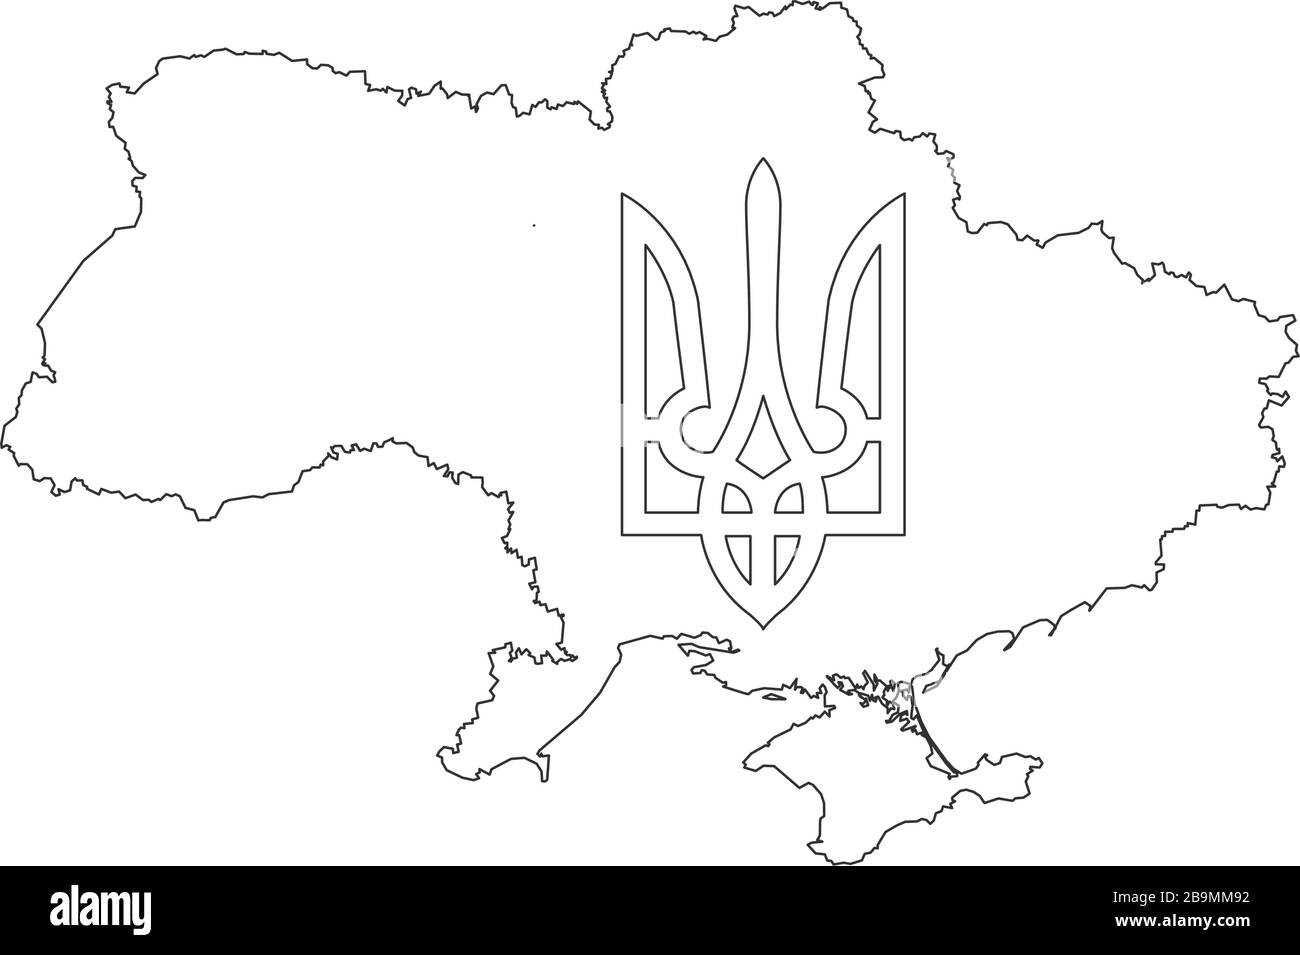 Linear Map of Ukraine with Tryzub. Ukrainian Coat of Arms, trident national symbol. Stock Vector illustration isolated on white background Stock Vector